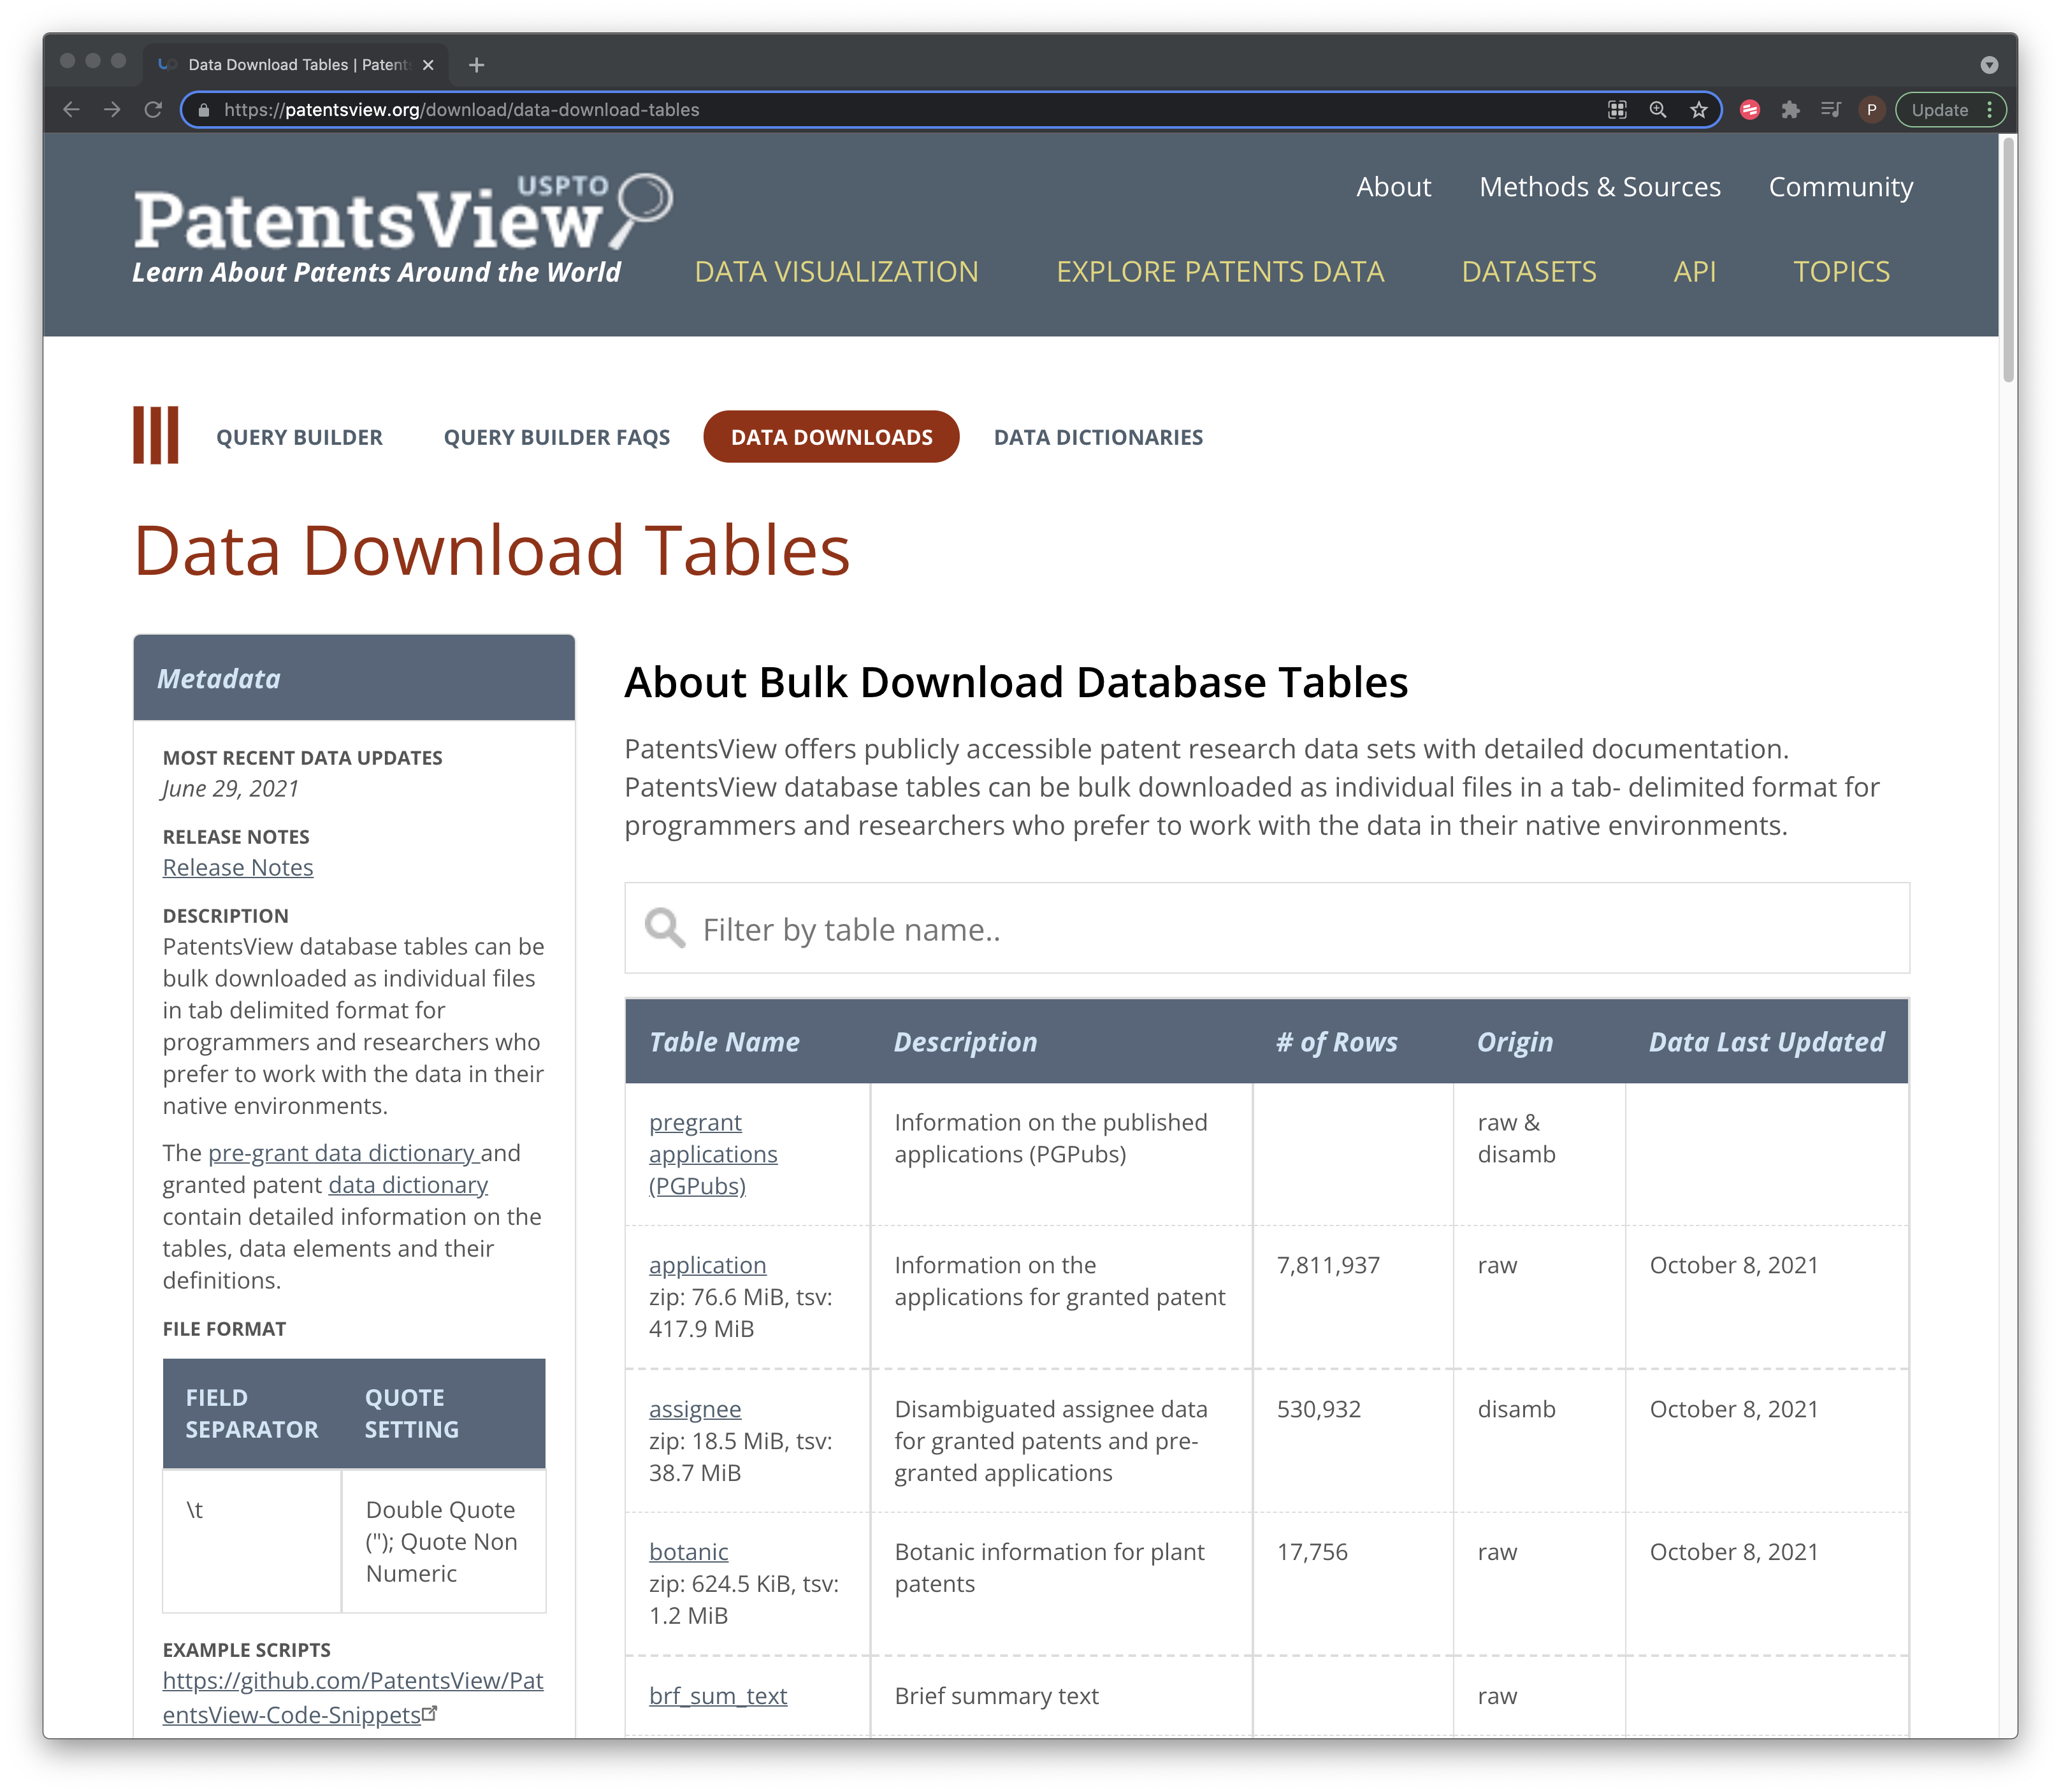 The PatentsView Data Download Page